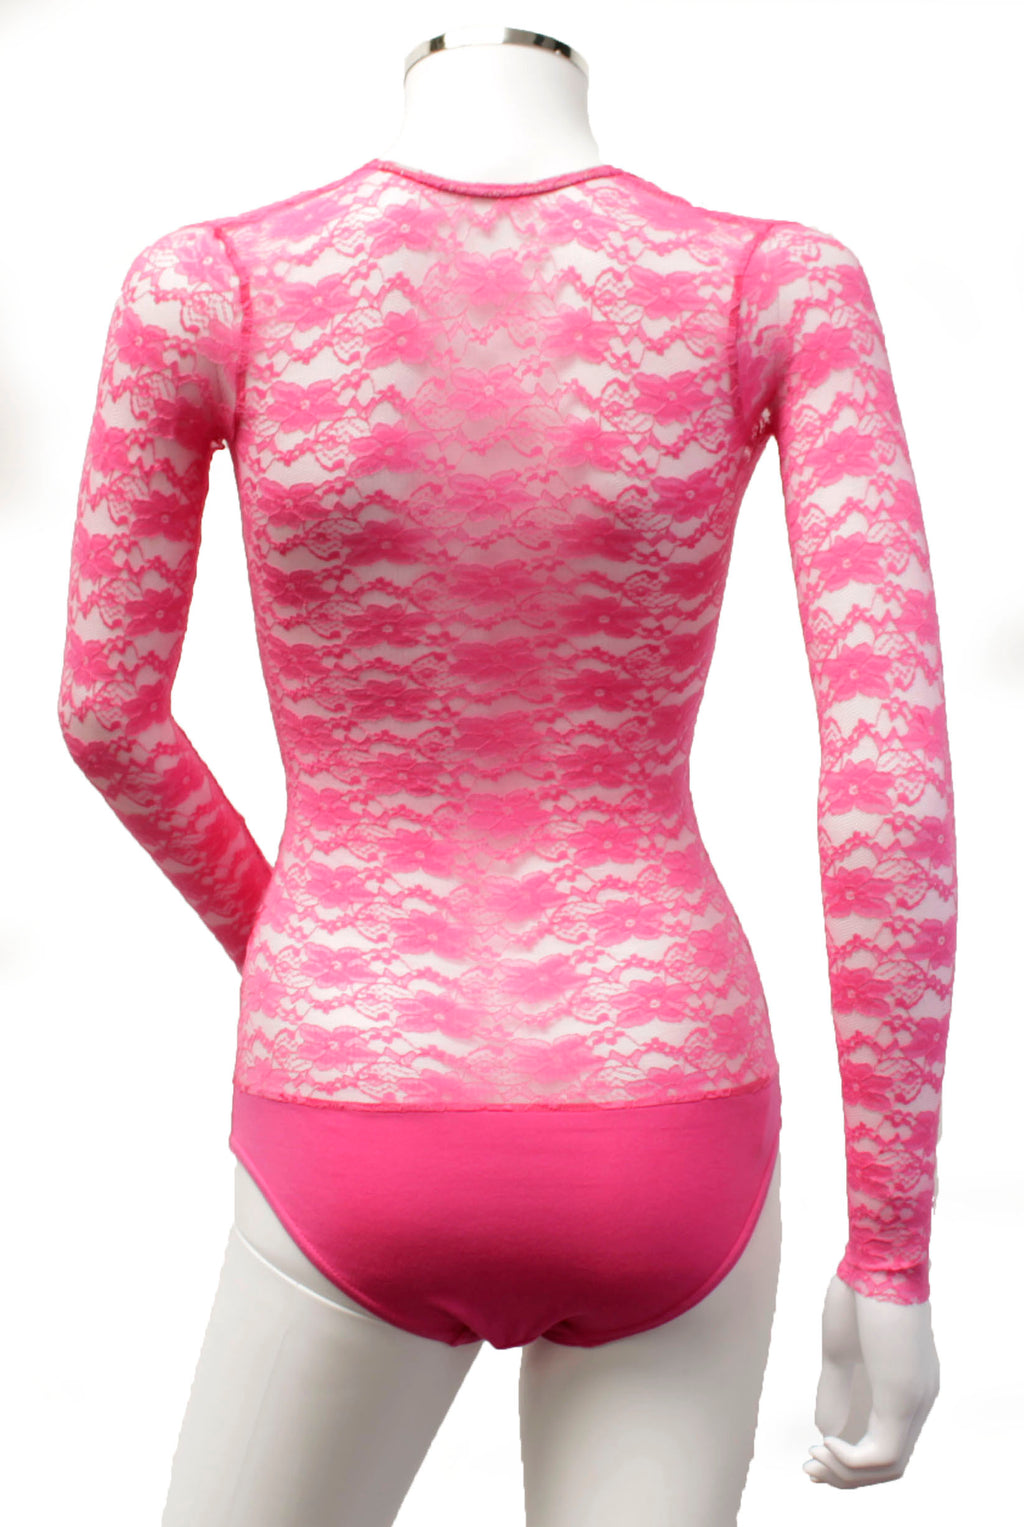 Underbust with Sleeves - Pink Lace